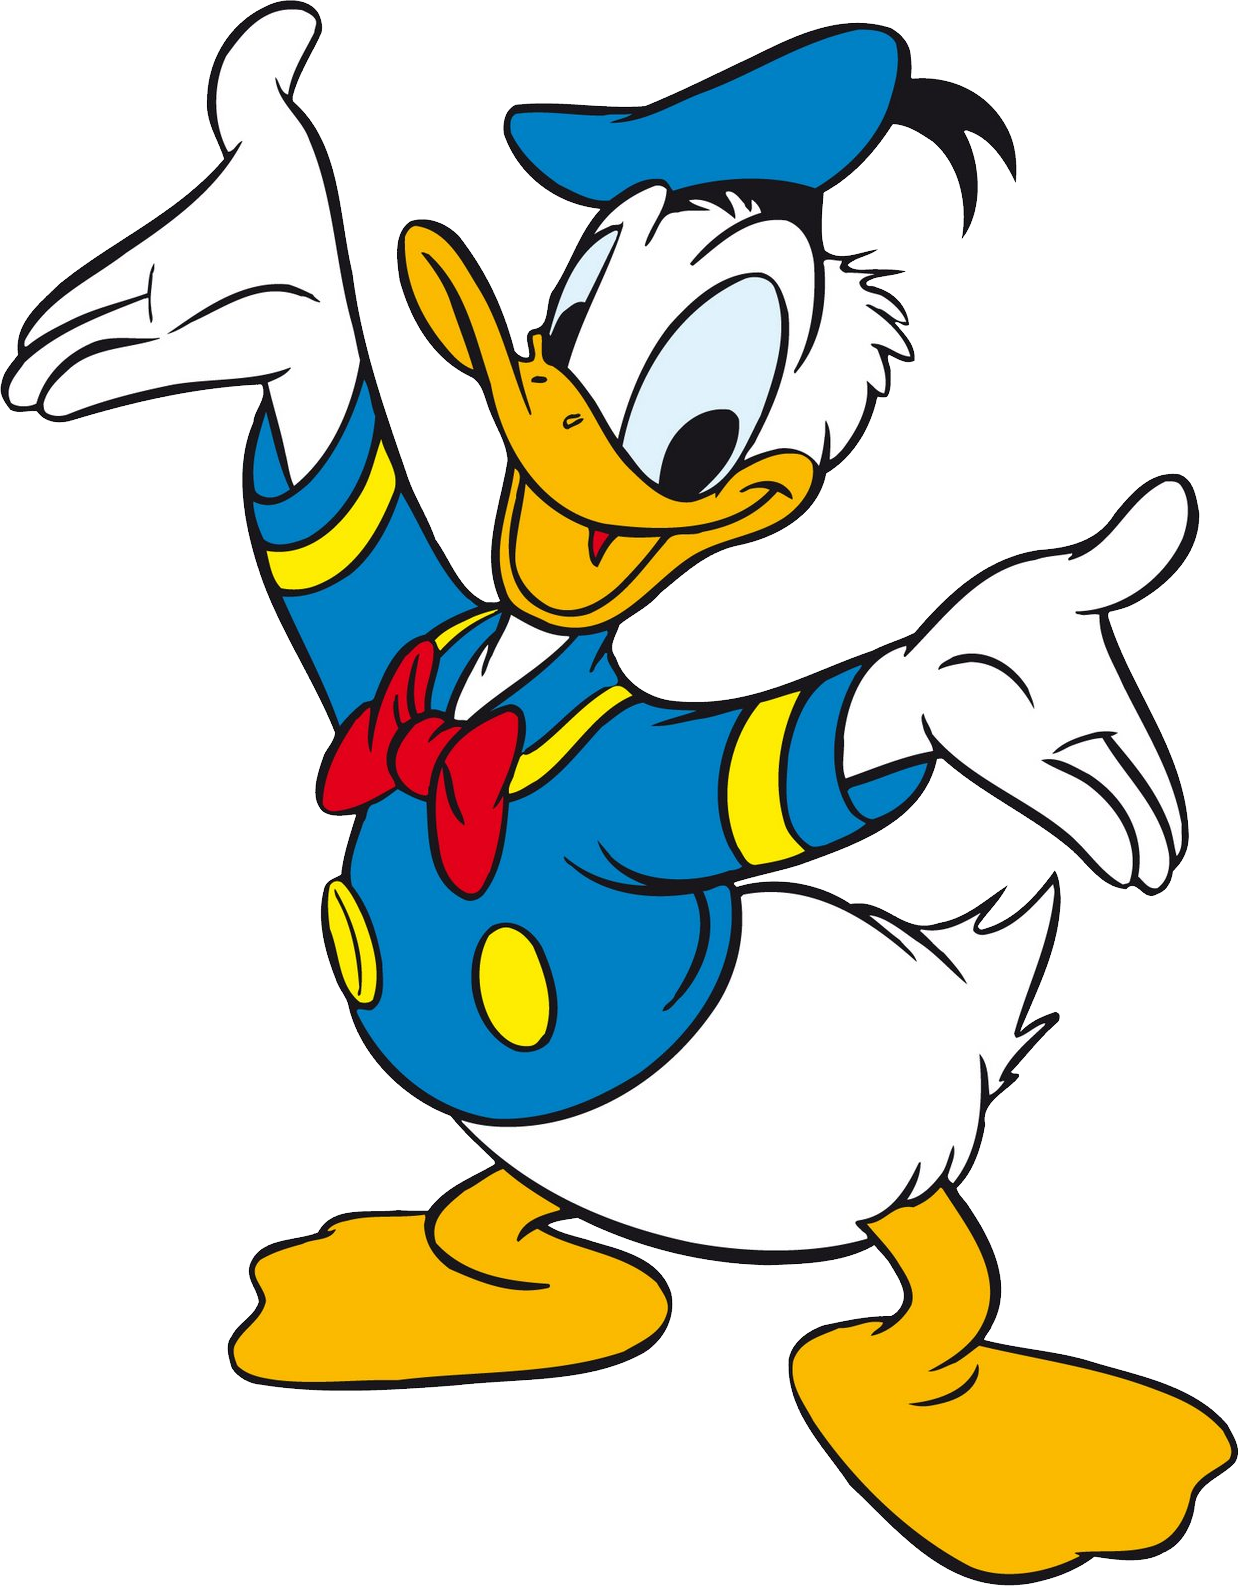 donald_duck_PNG21.png